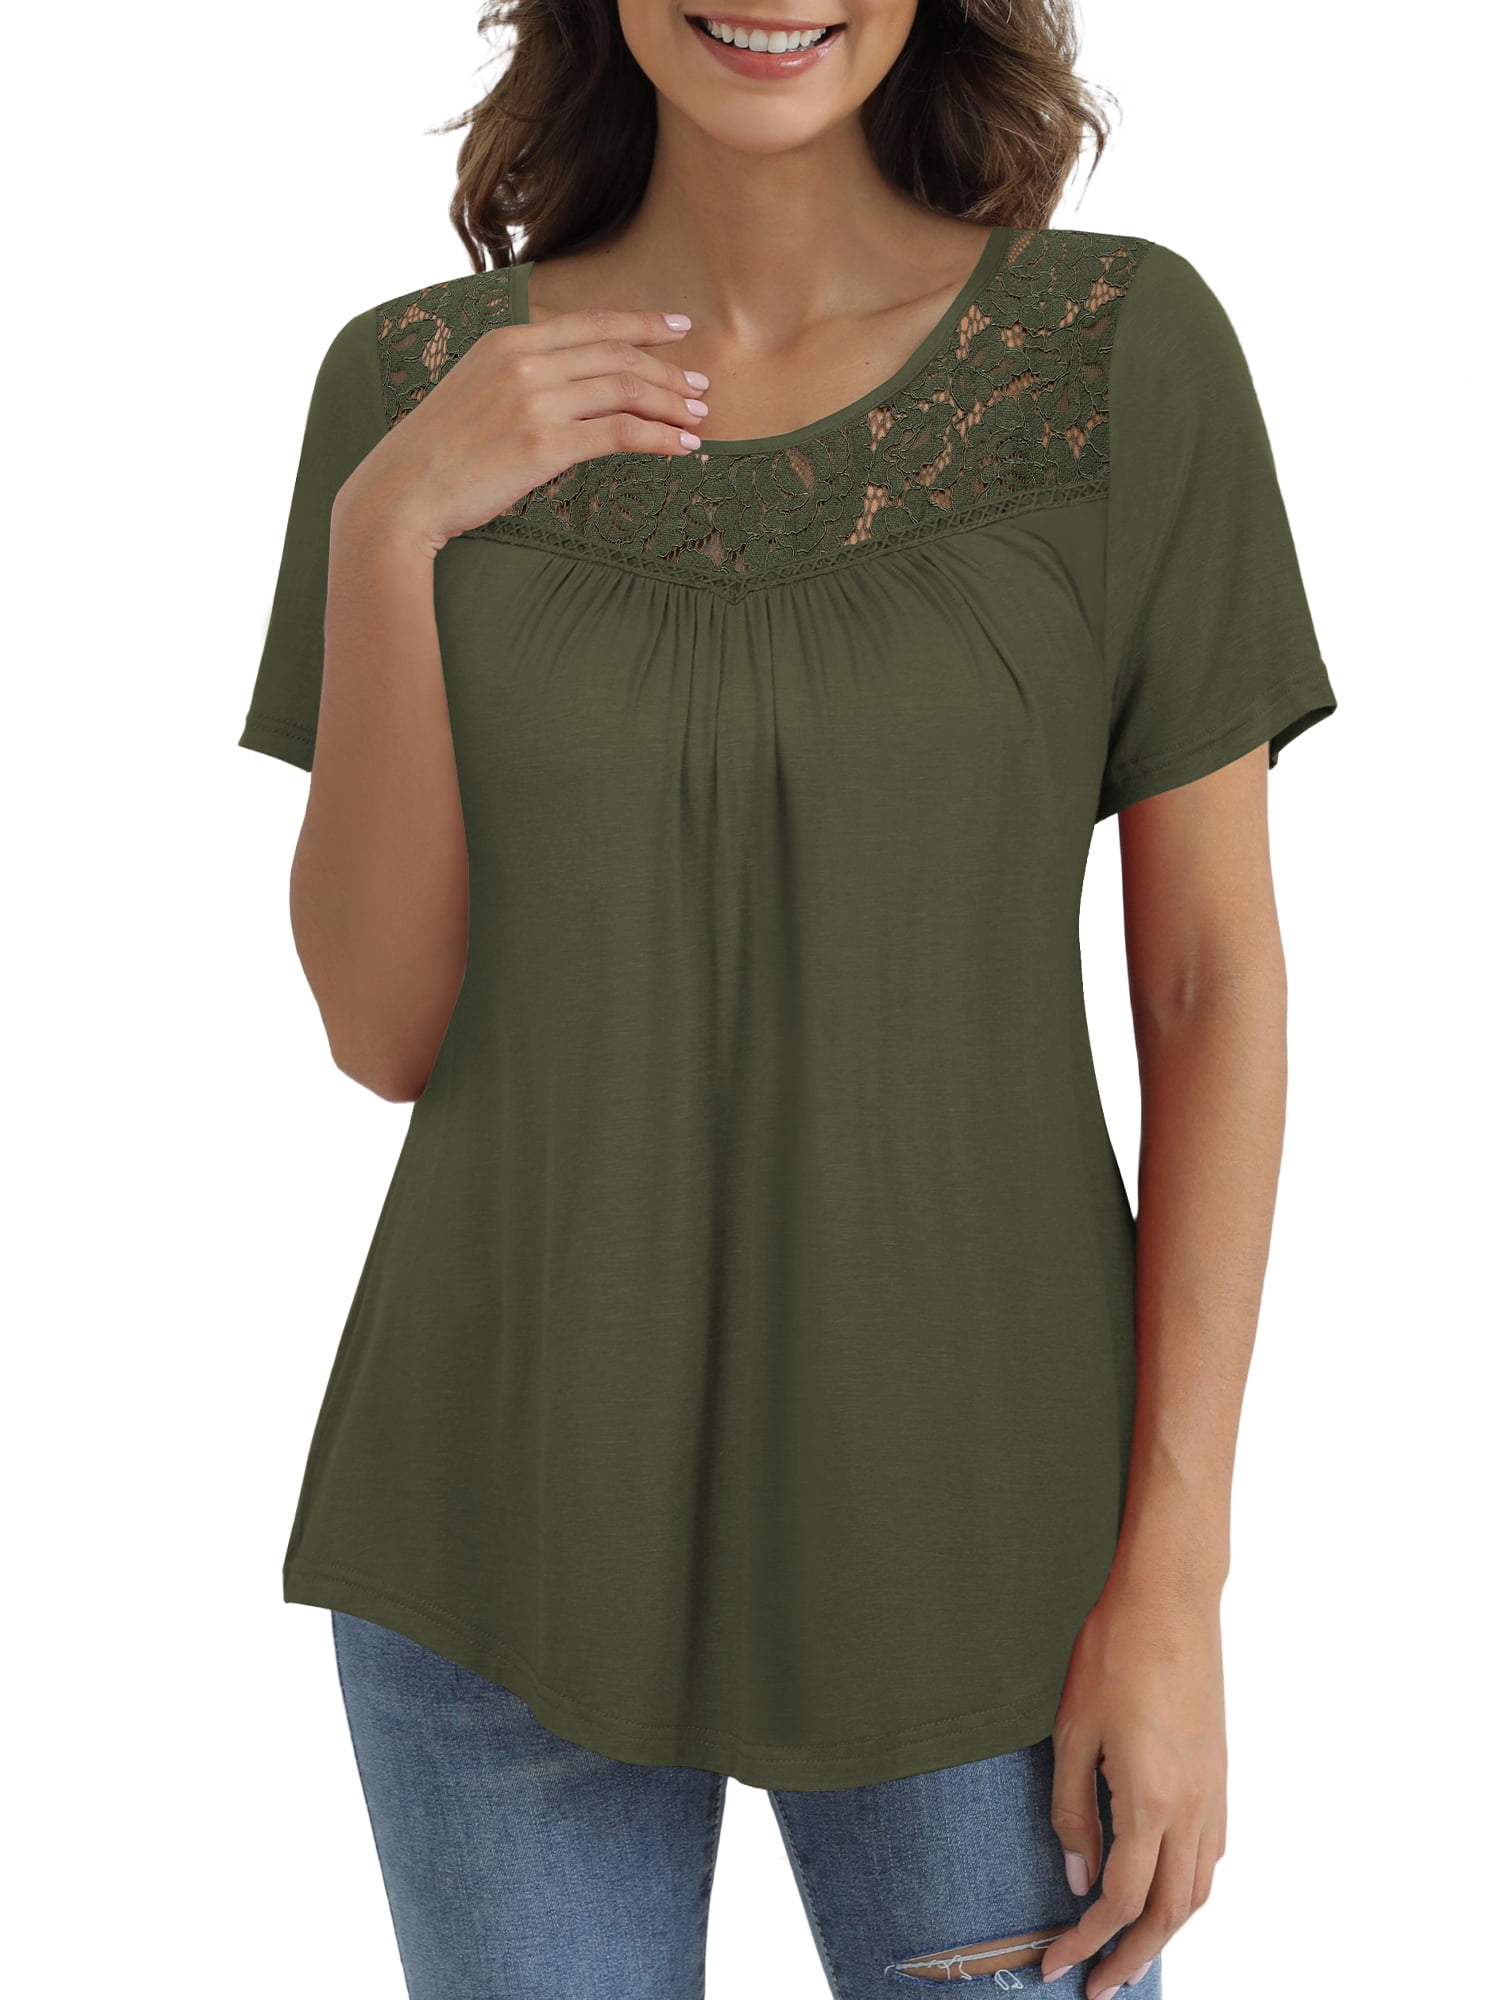 a.Jesdani Womens Tops Plus Size Short Sleeve Army Green Shirts Lace ...